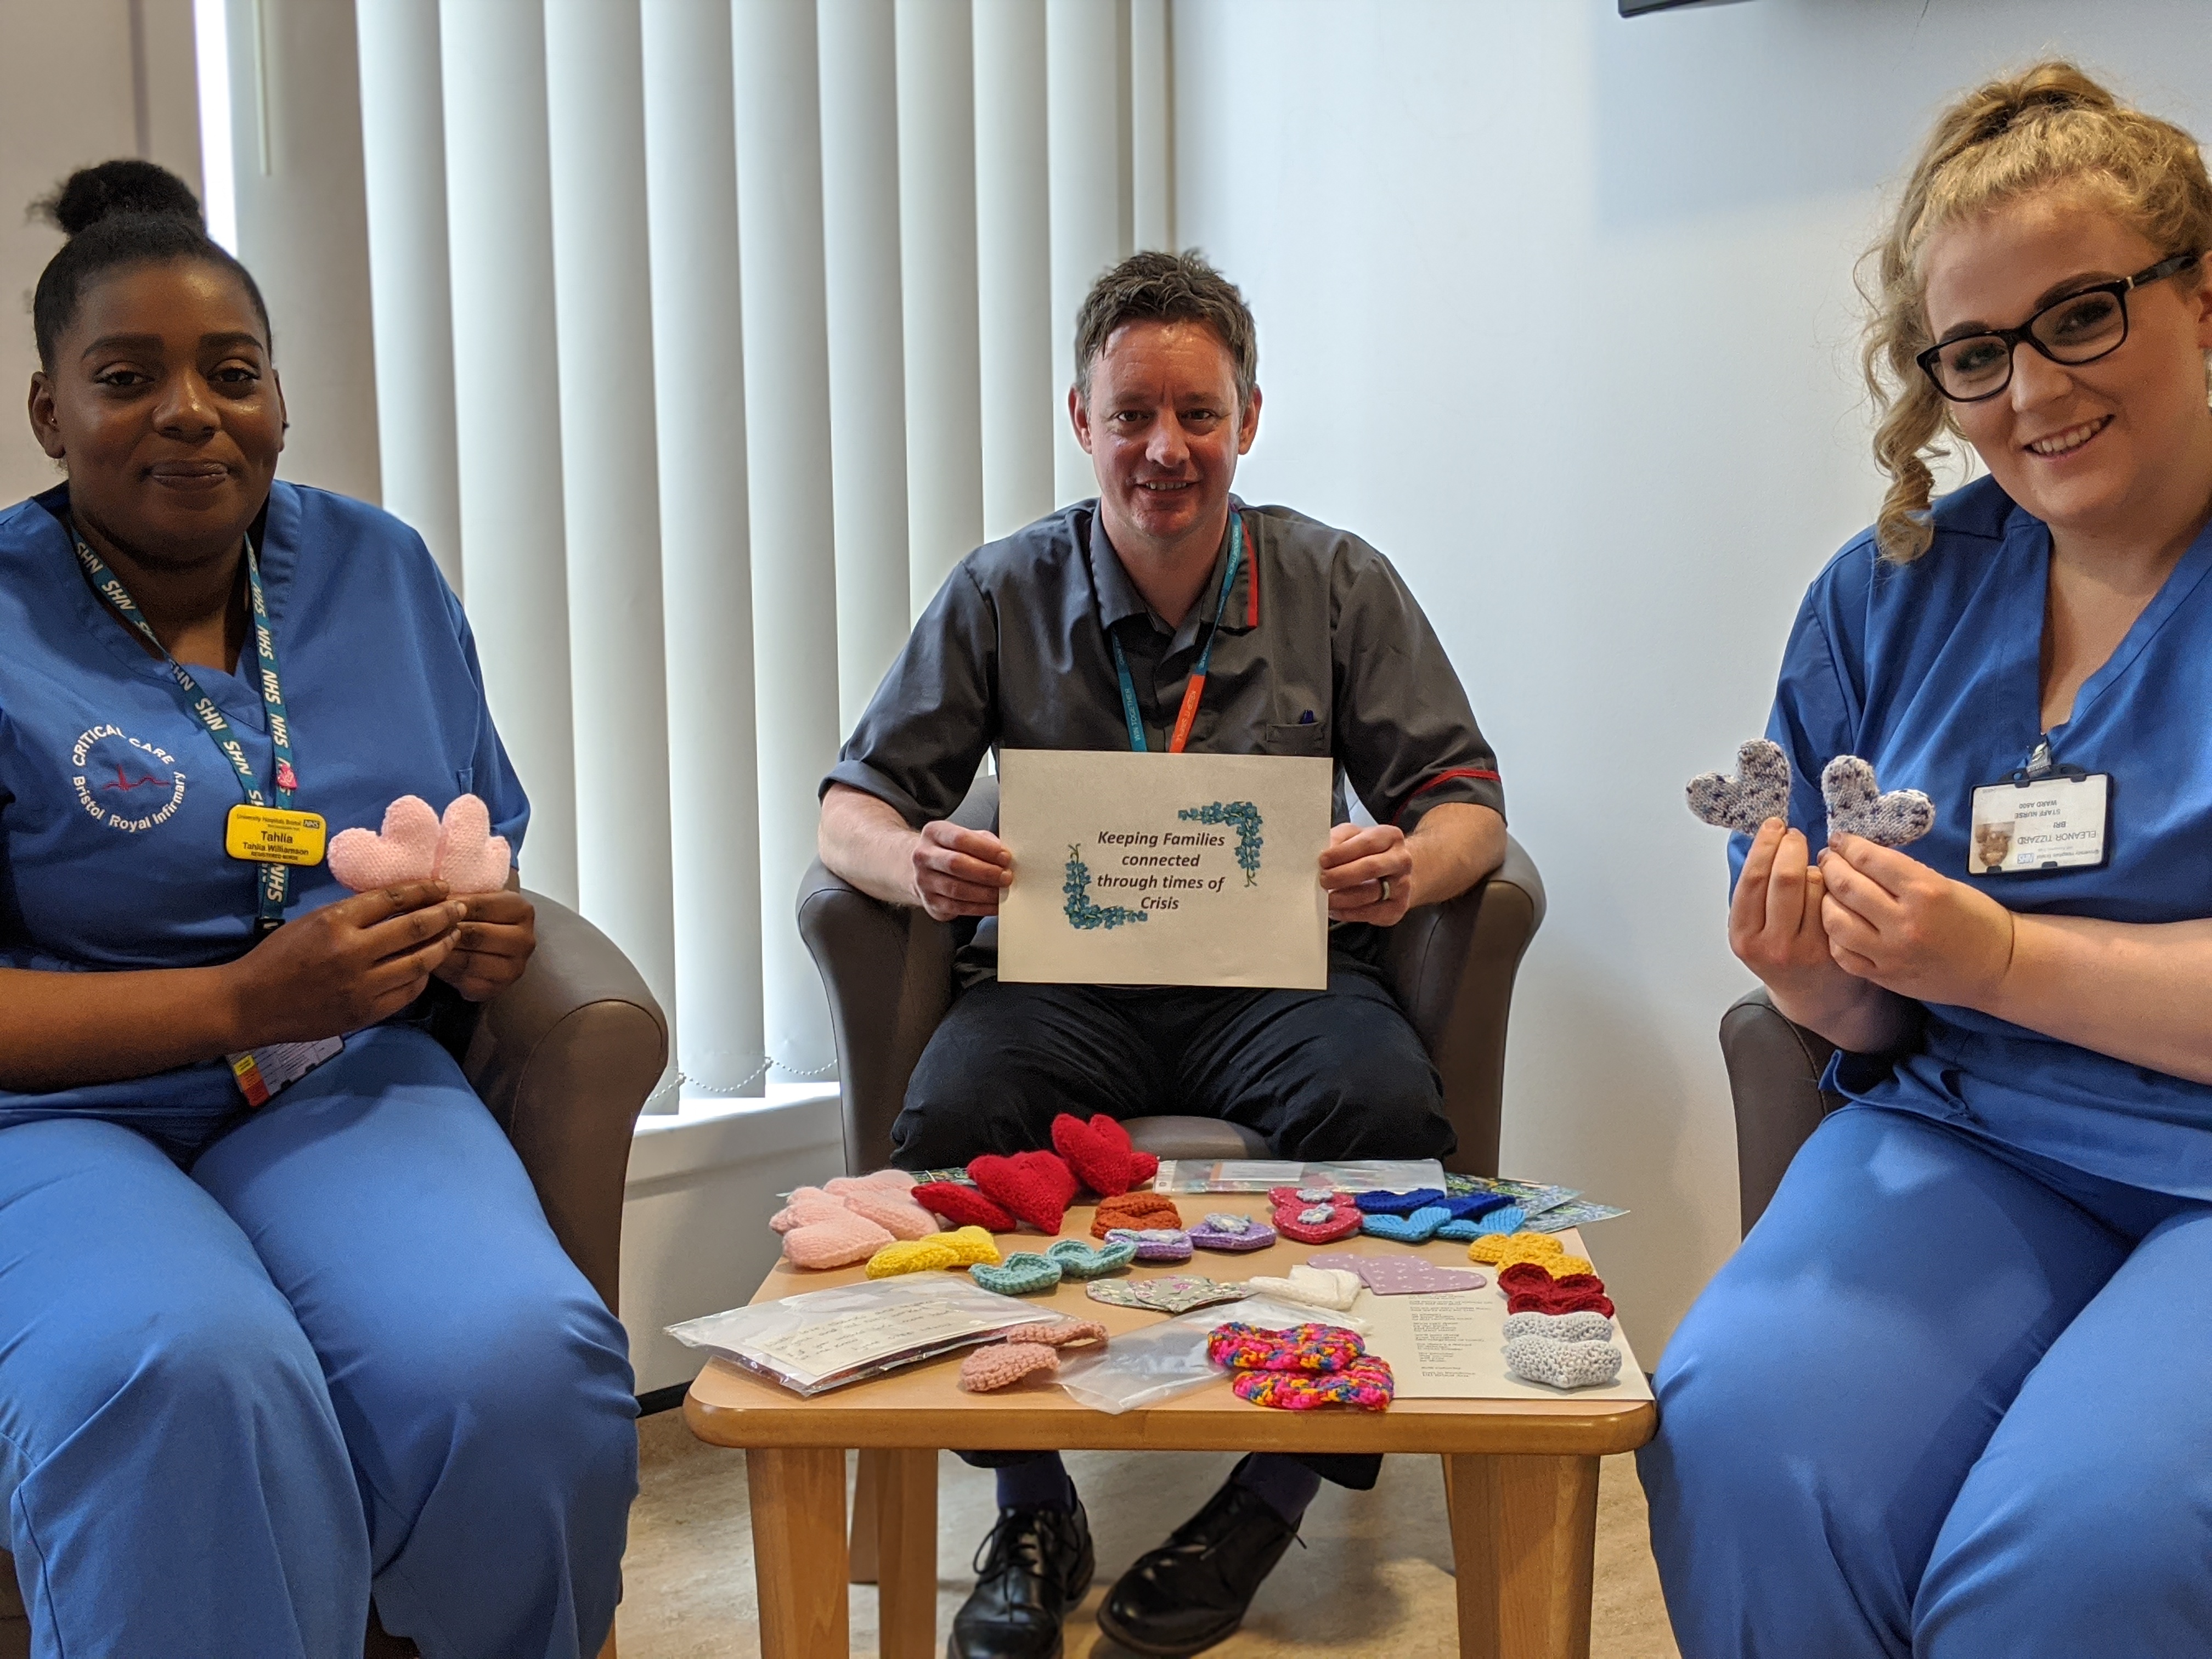 Bristol ITU nurses launch ‘Heart to Heart’ campaign to connect families with their loved ones